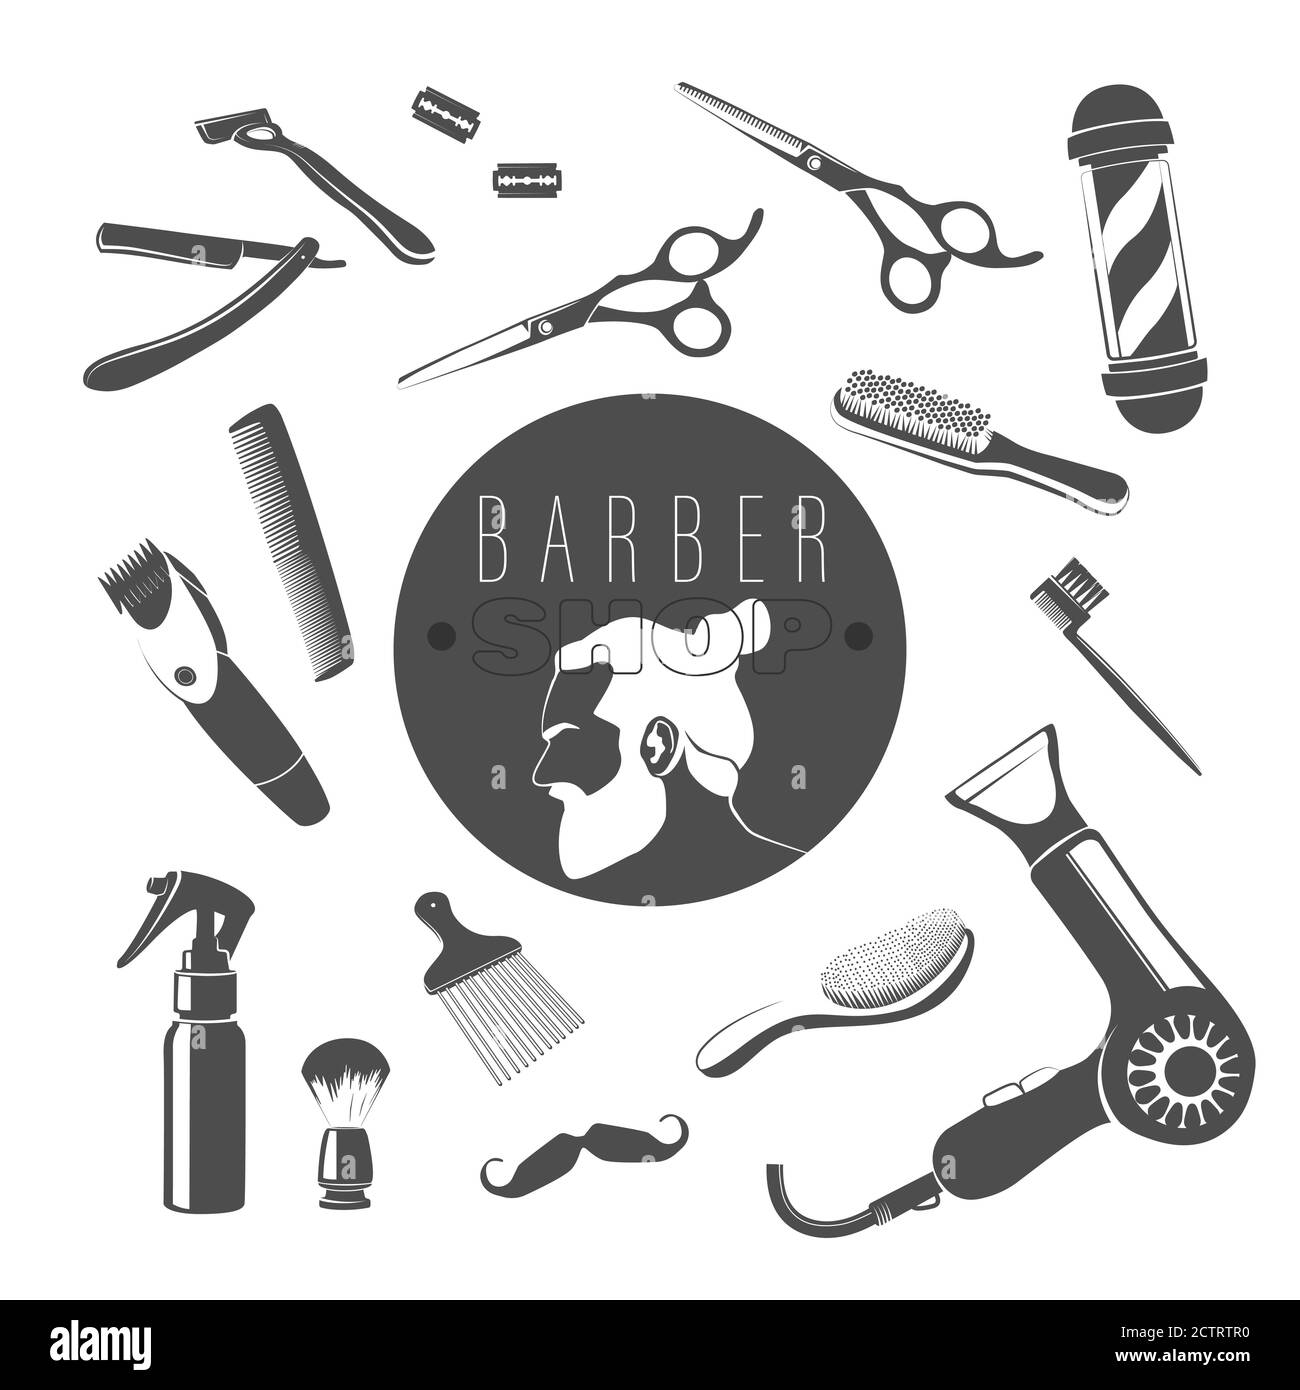 Set of vector elements for barber shop. Isolated over white background. Stock Vector